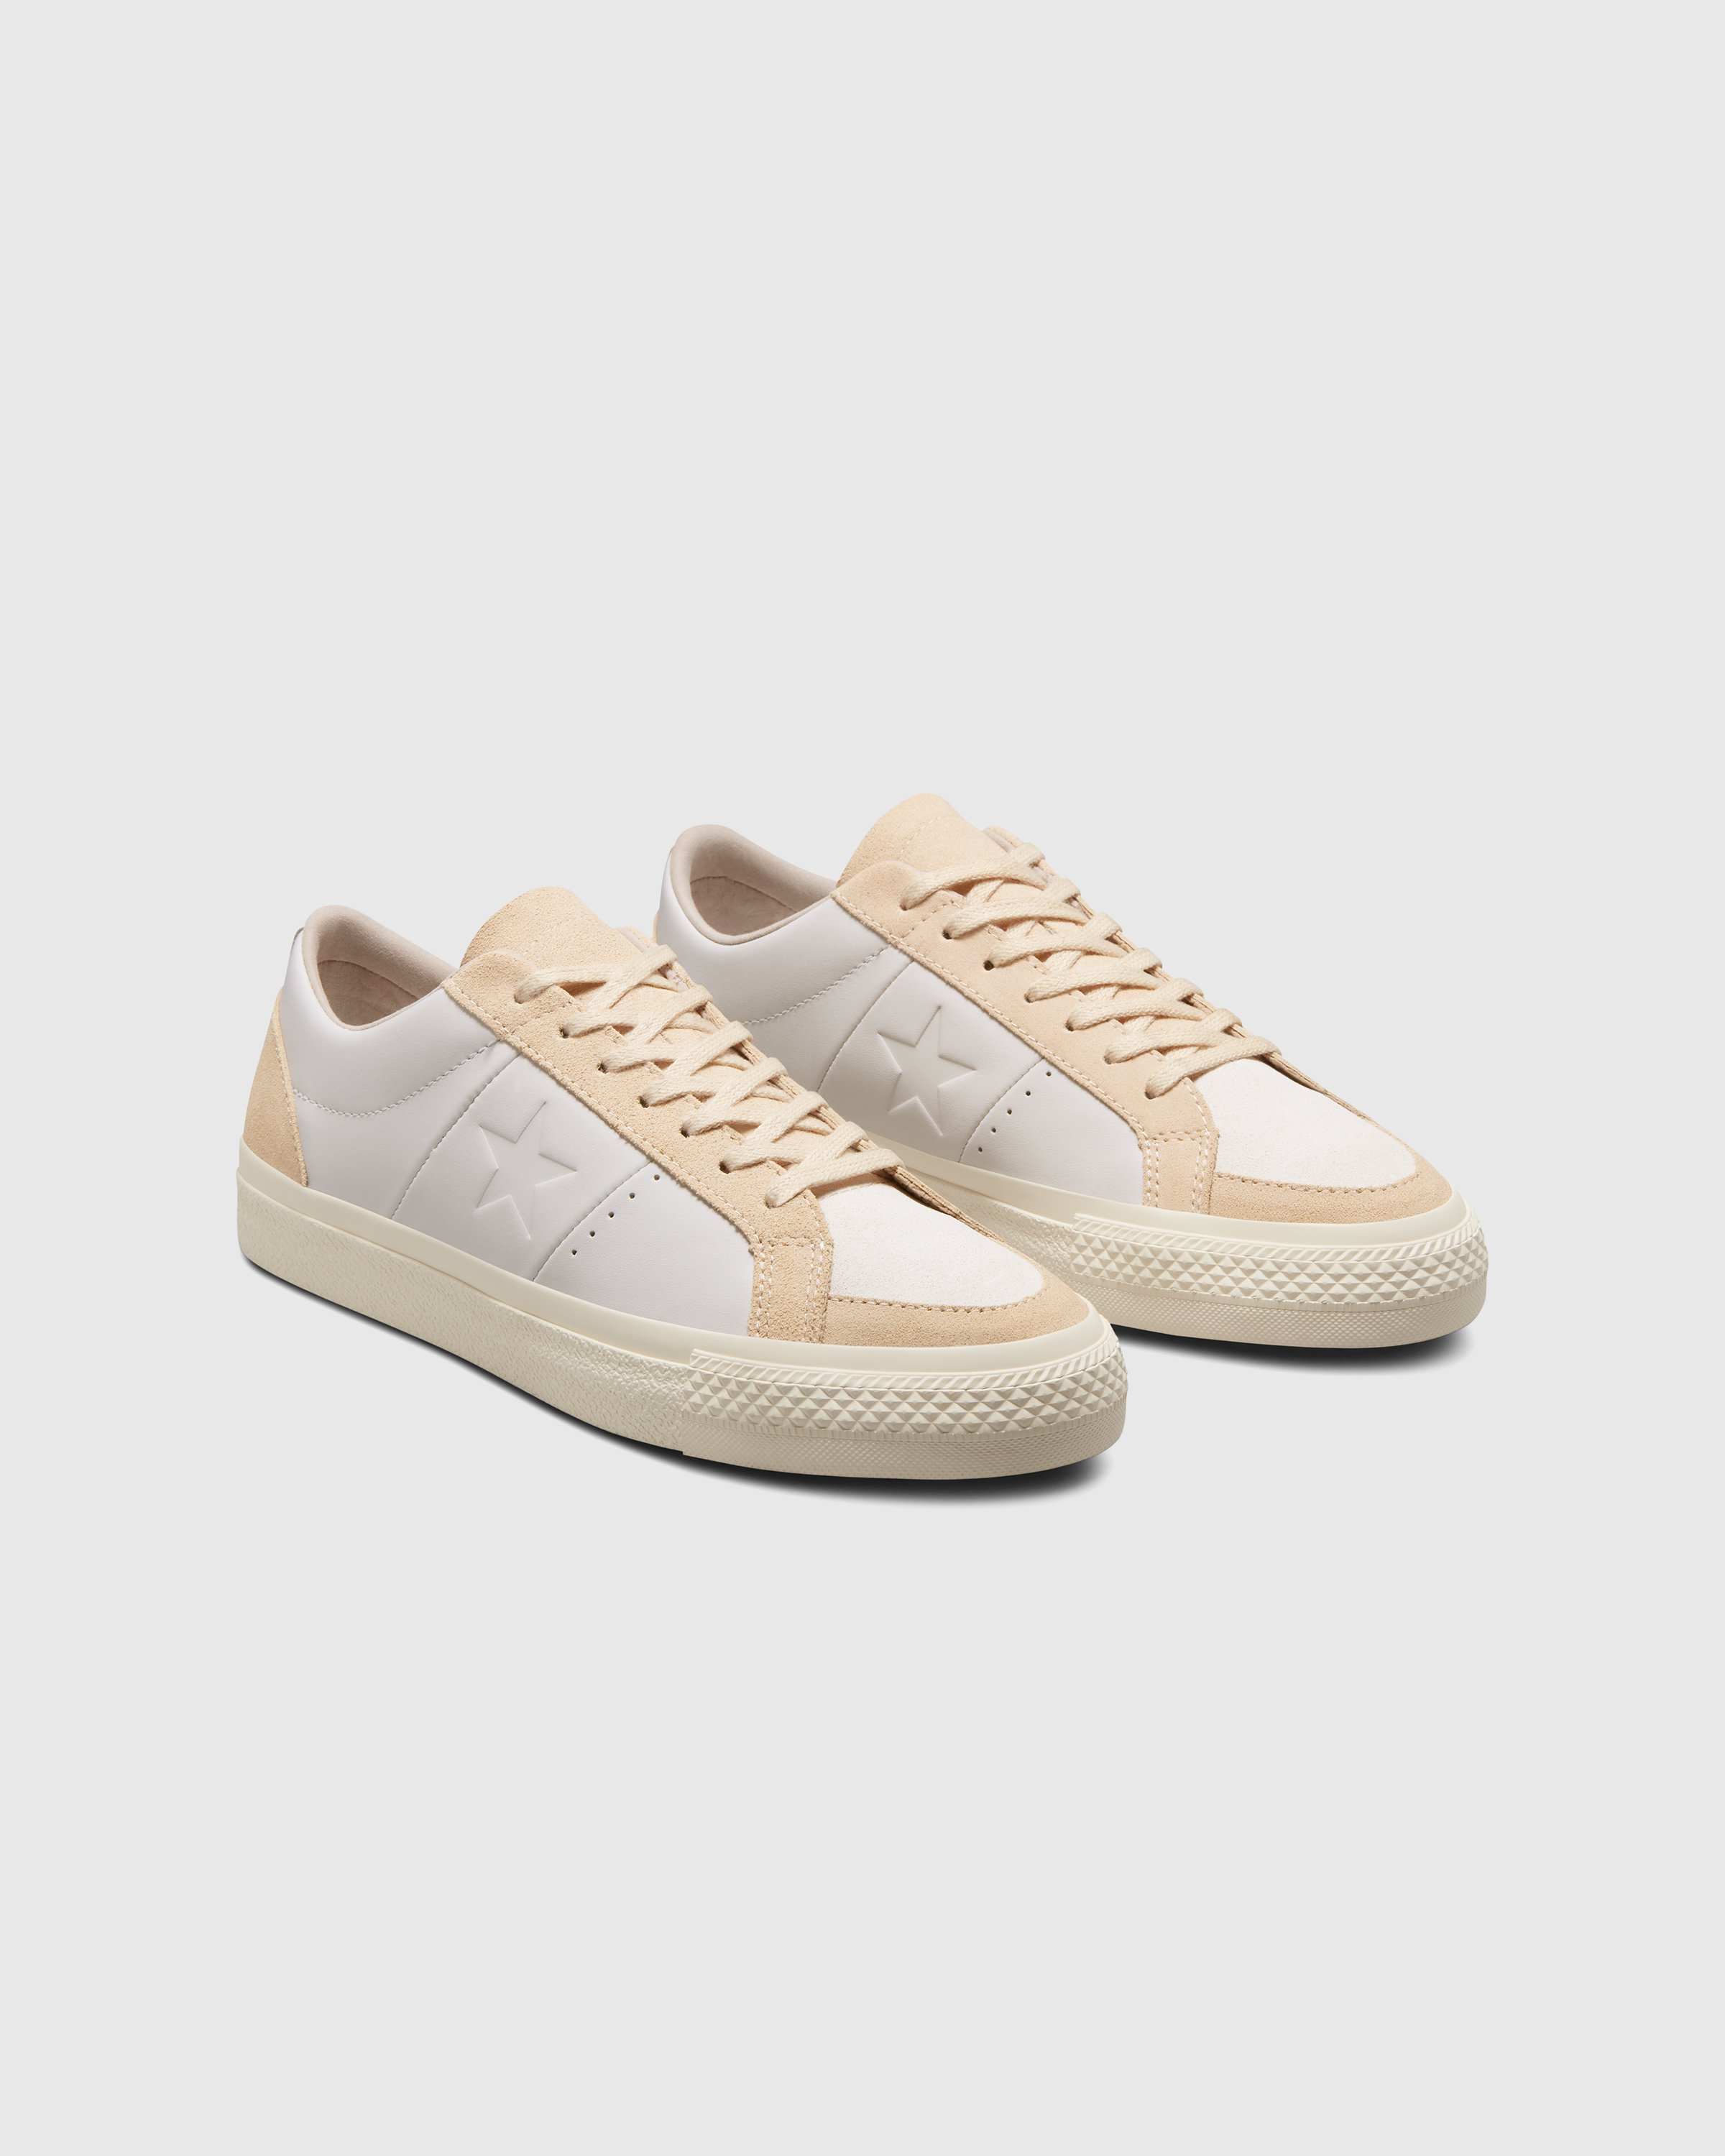 Converse - One Star Pro Ox South of Houston Pale Putty/Natural Ivory - Footwear - White - Image 3